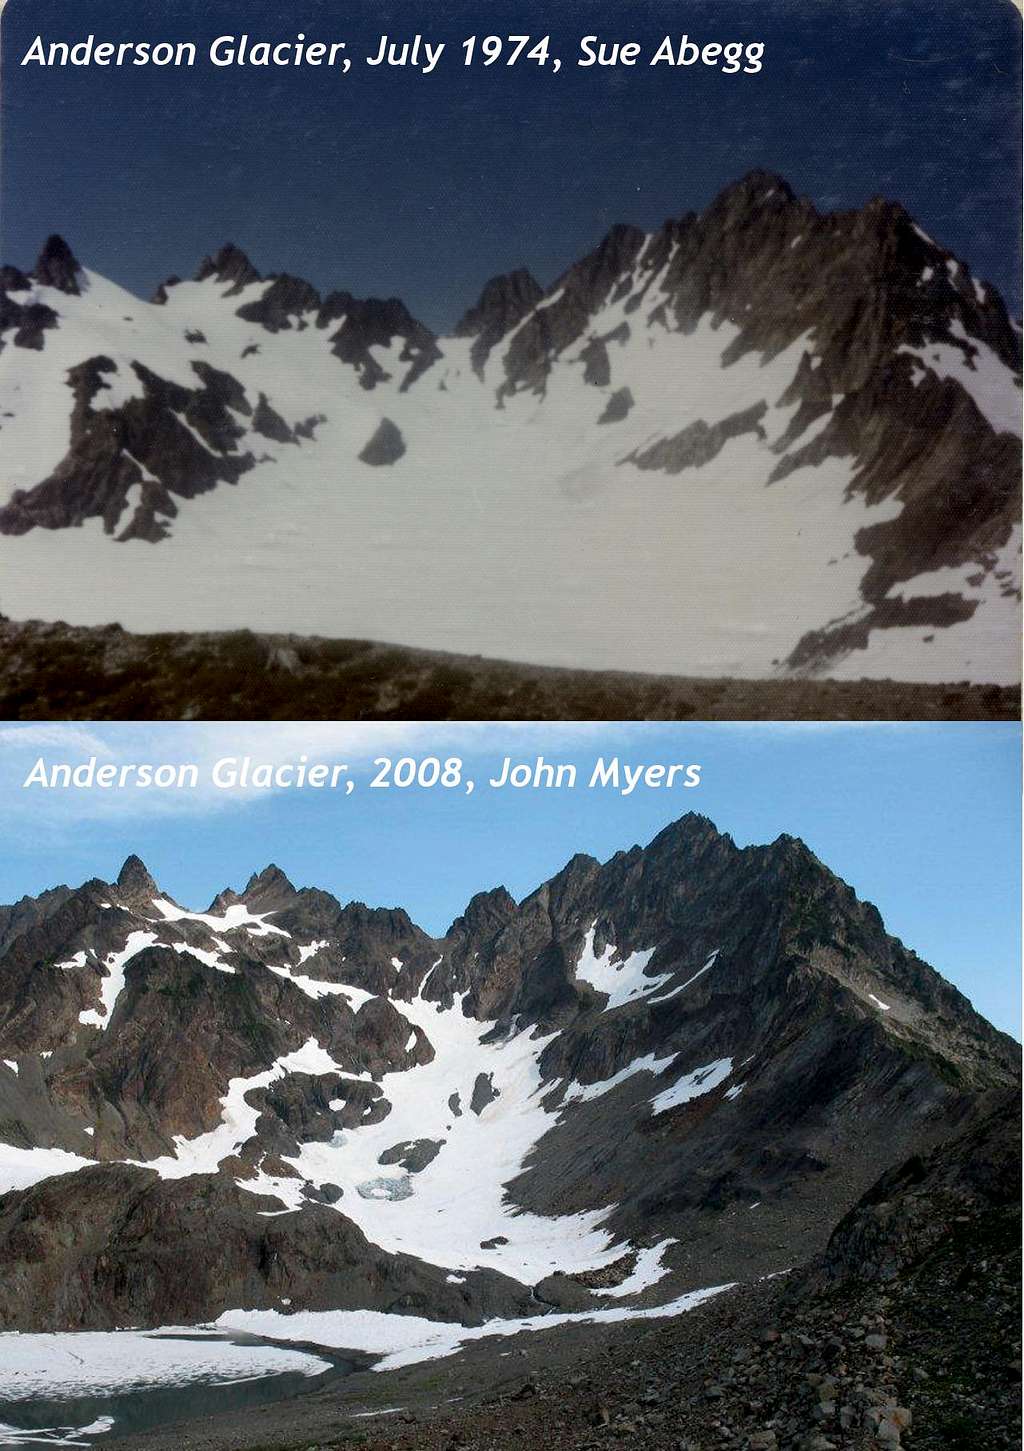 Shrinking Anderson Glacier in the Olympic Mnts